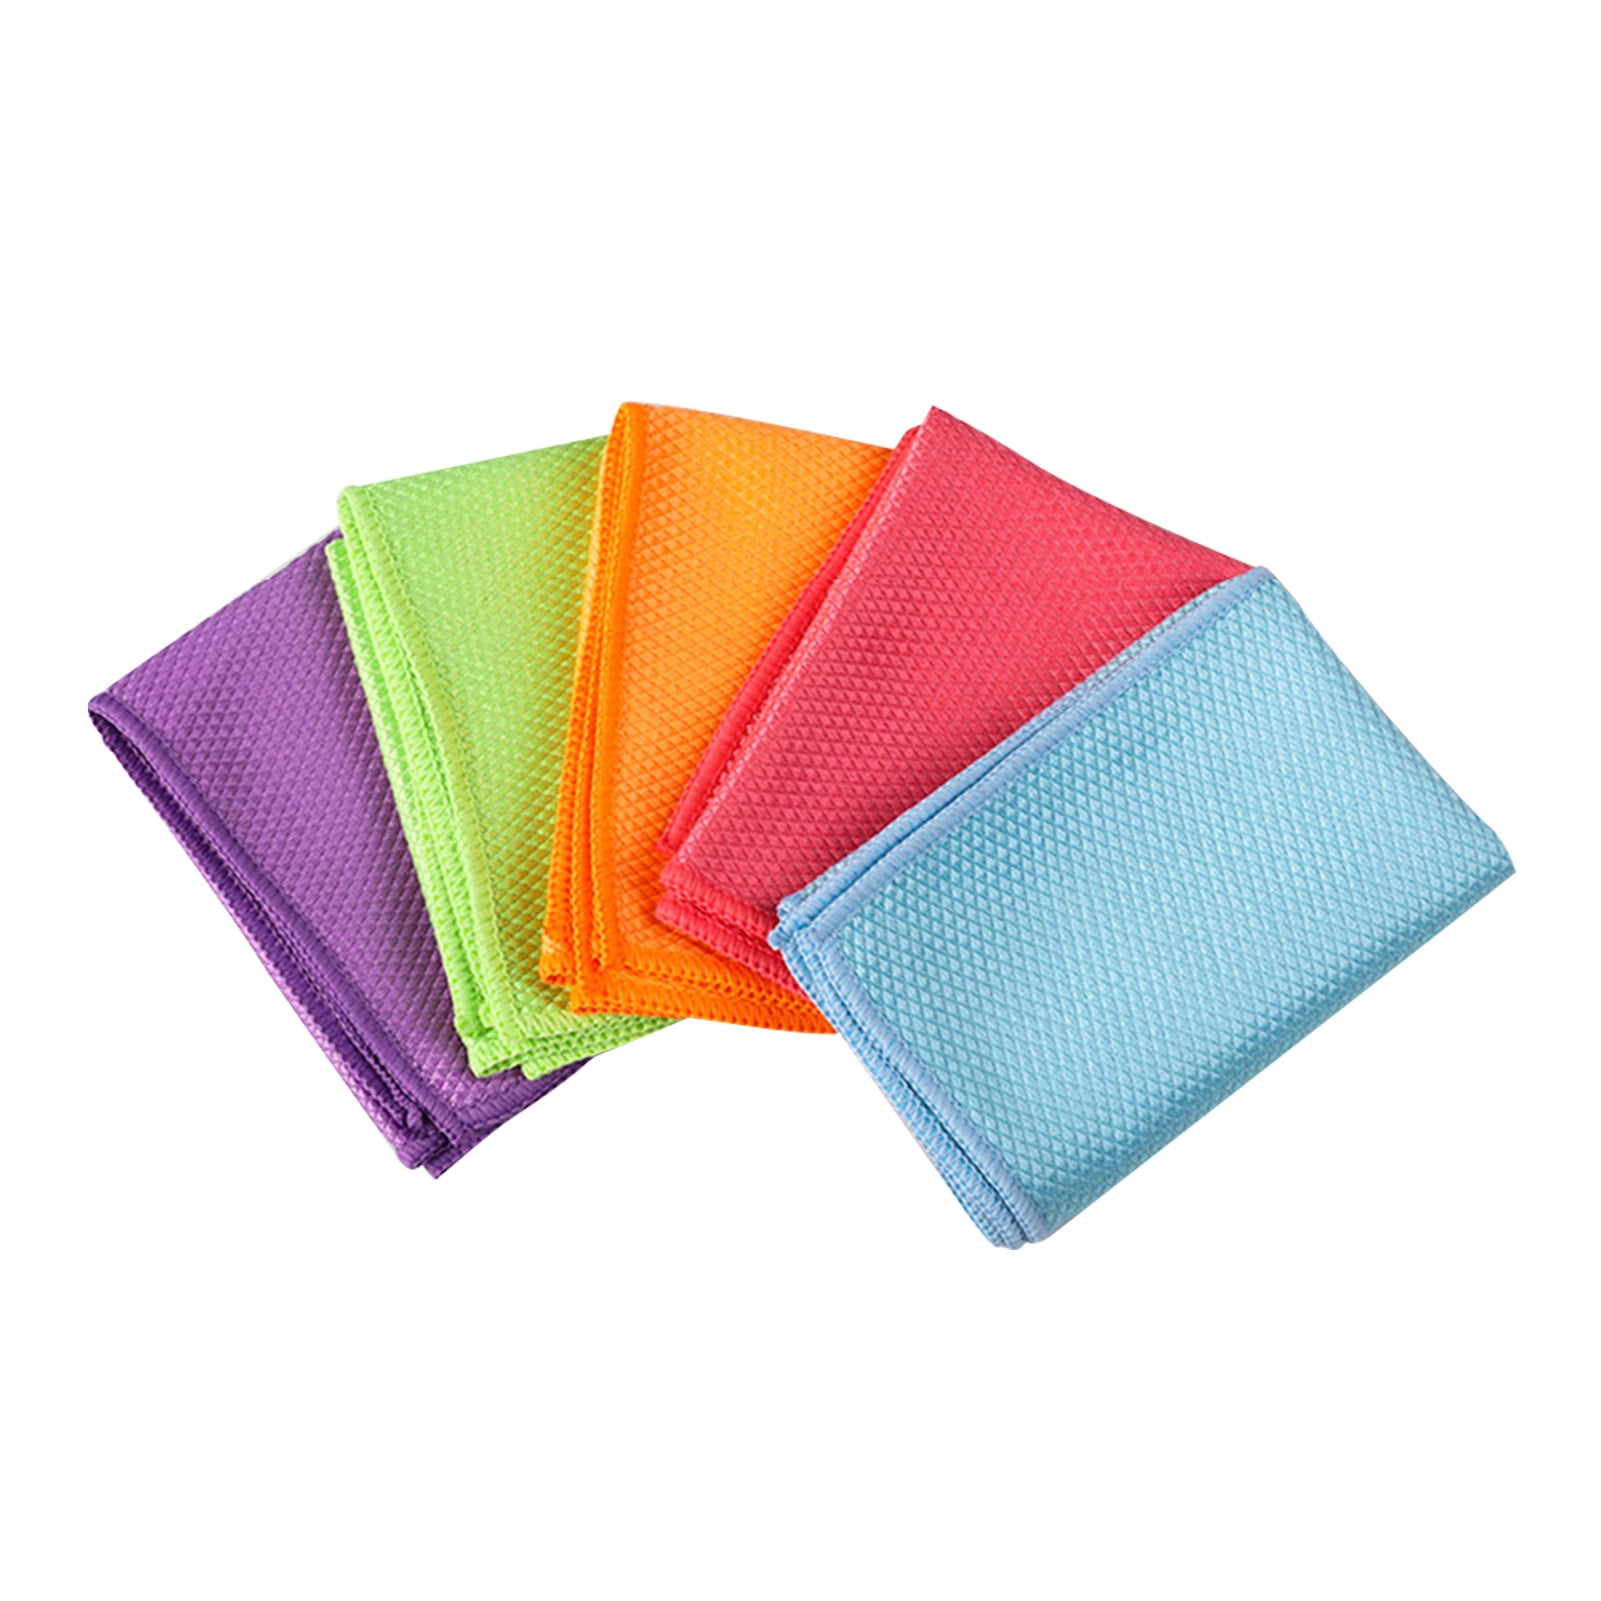 Details about   5x Glass Cleaning Cloth for Auto Household Fish Scale Polishing Microfiber Cloth 